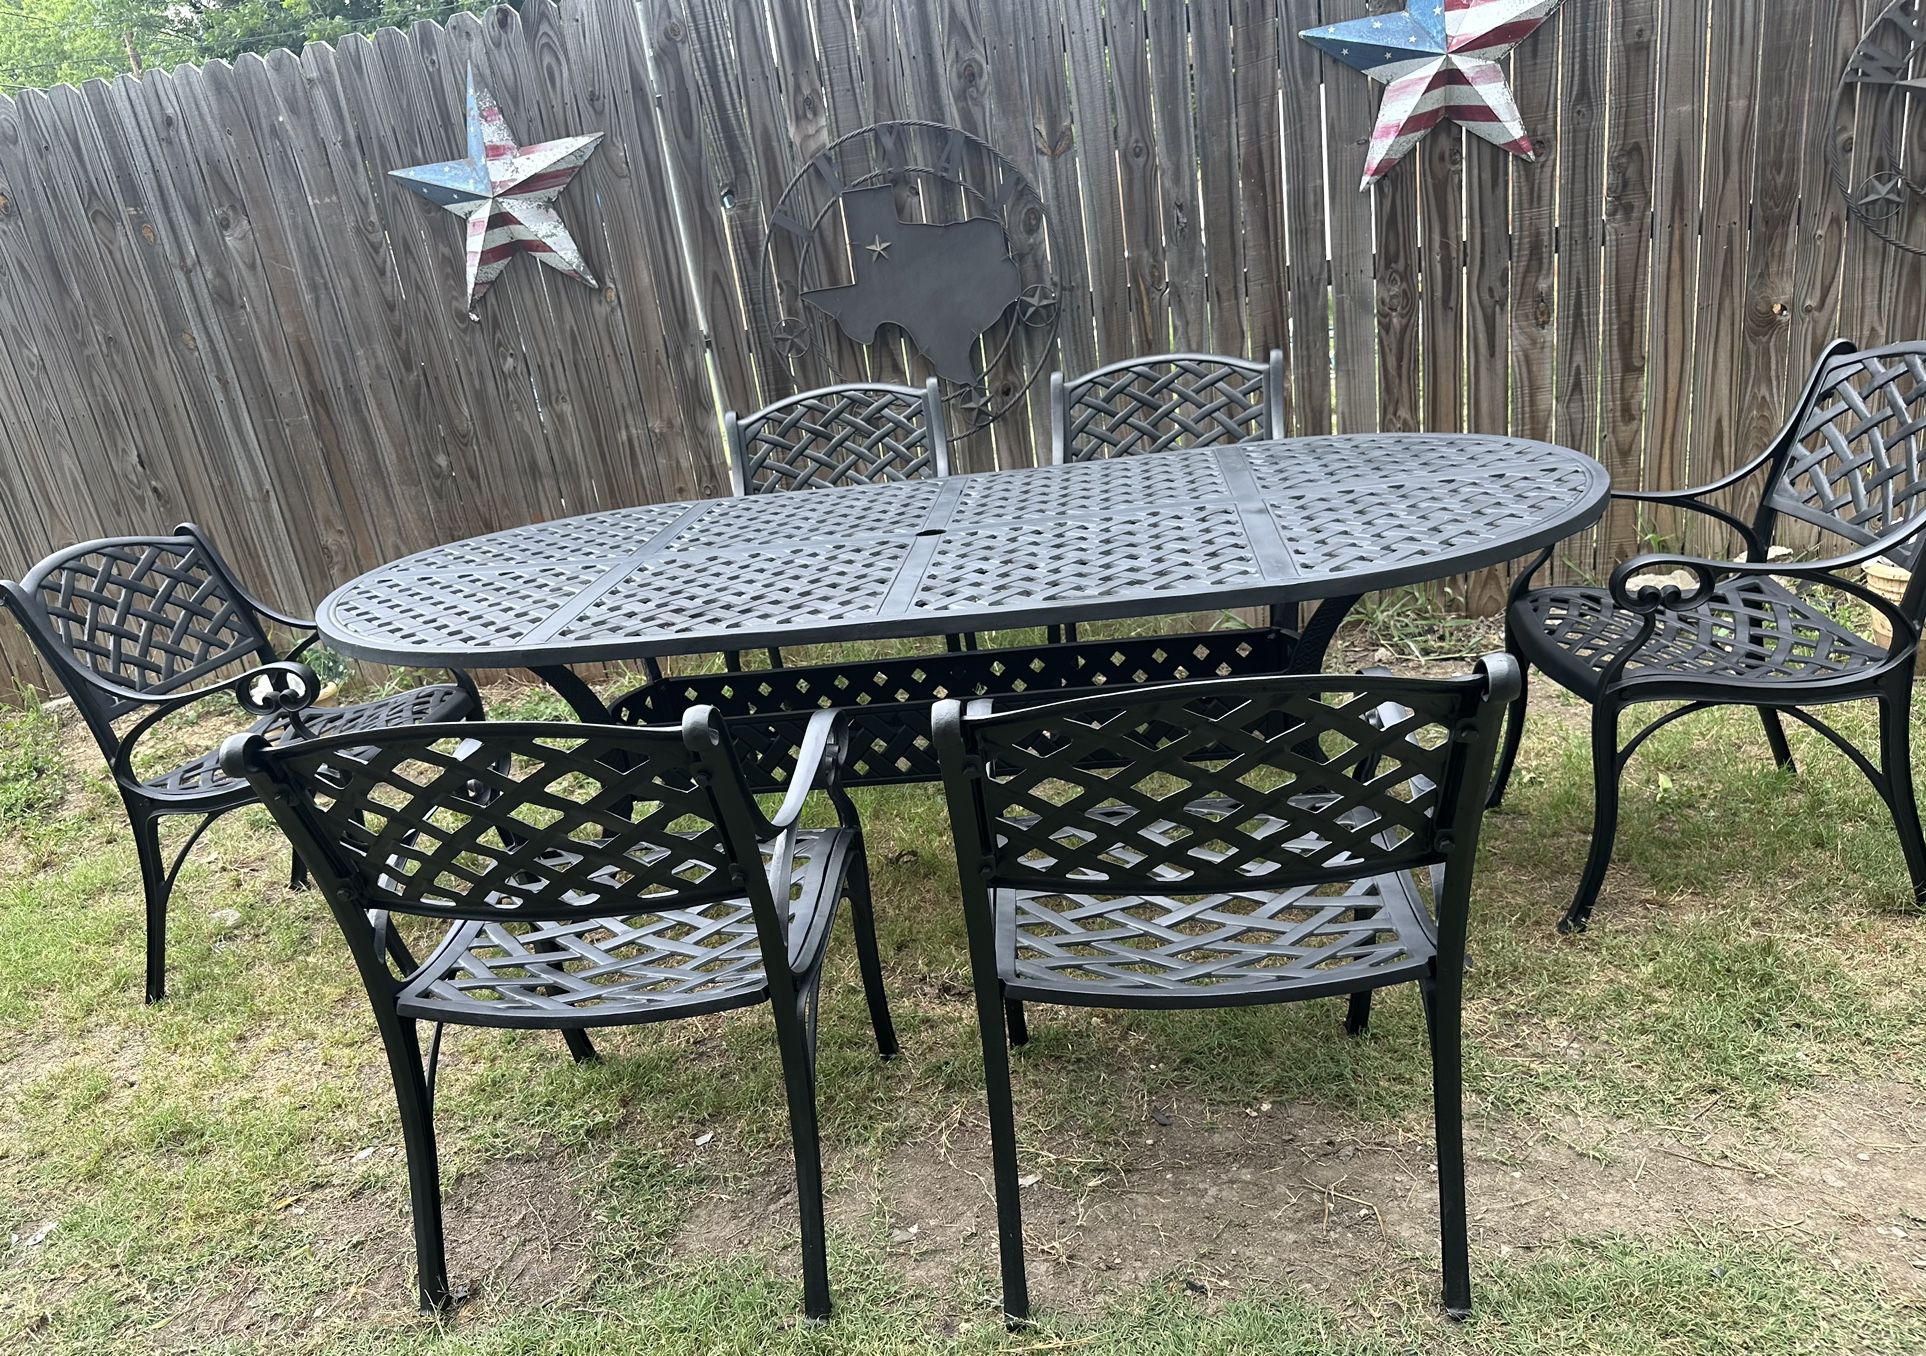 7 Pc Hanamint Cast Iron Patio Set, Large Table And 6 Regular Chairs , All Set Really Heavy And Sturdy, Excellent Conditions $870